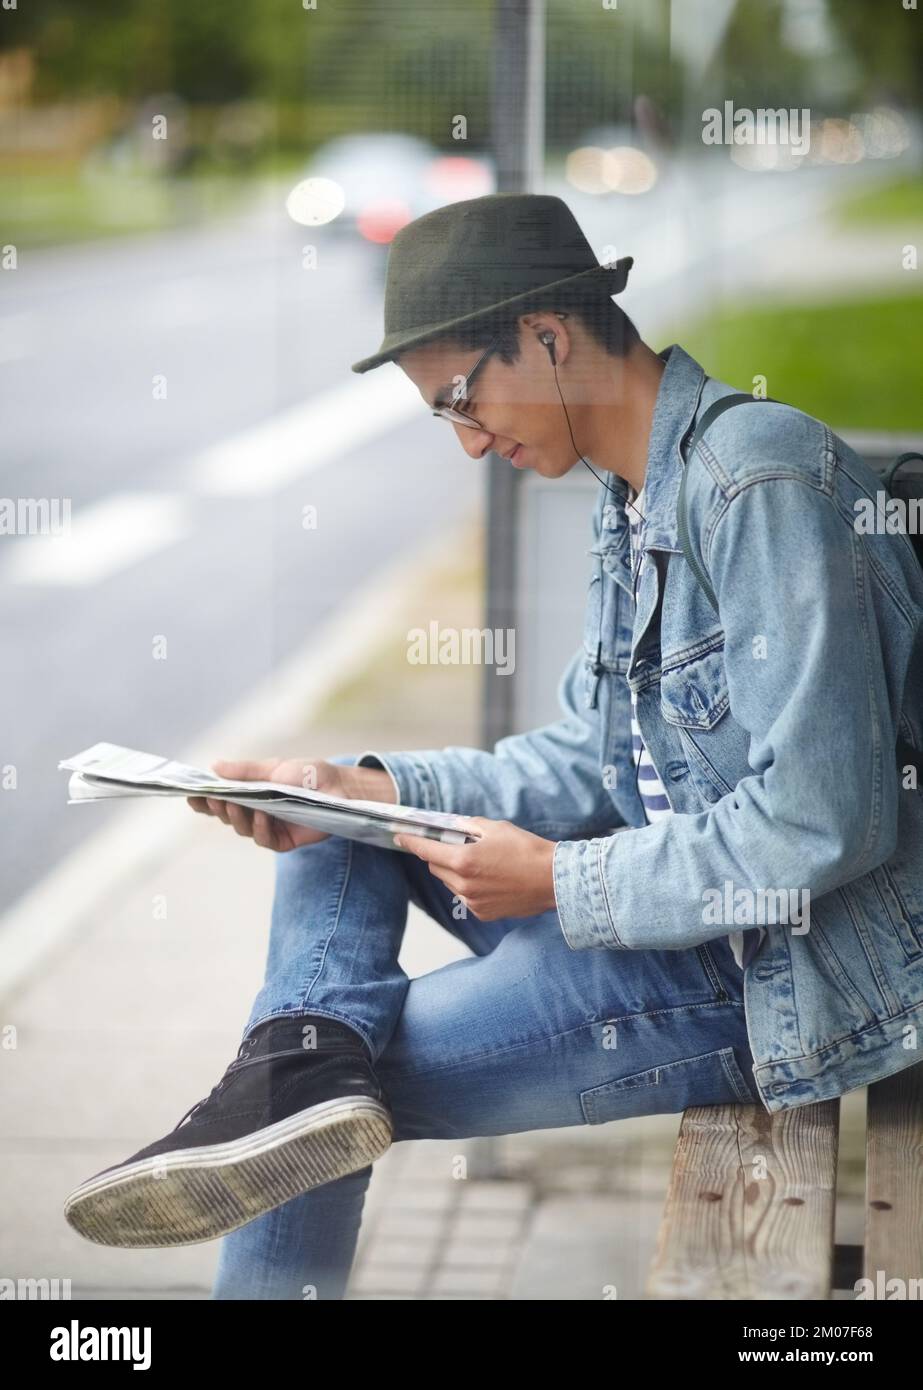 Reading todays newspaper. Hip young guy sitting at a bus stop while reading a newspaper. Stock Photo